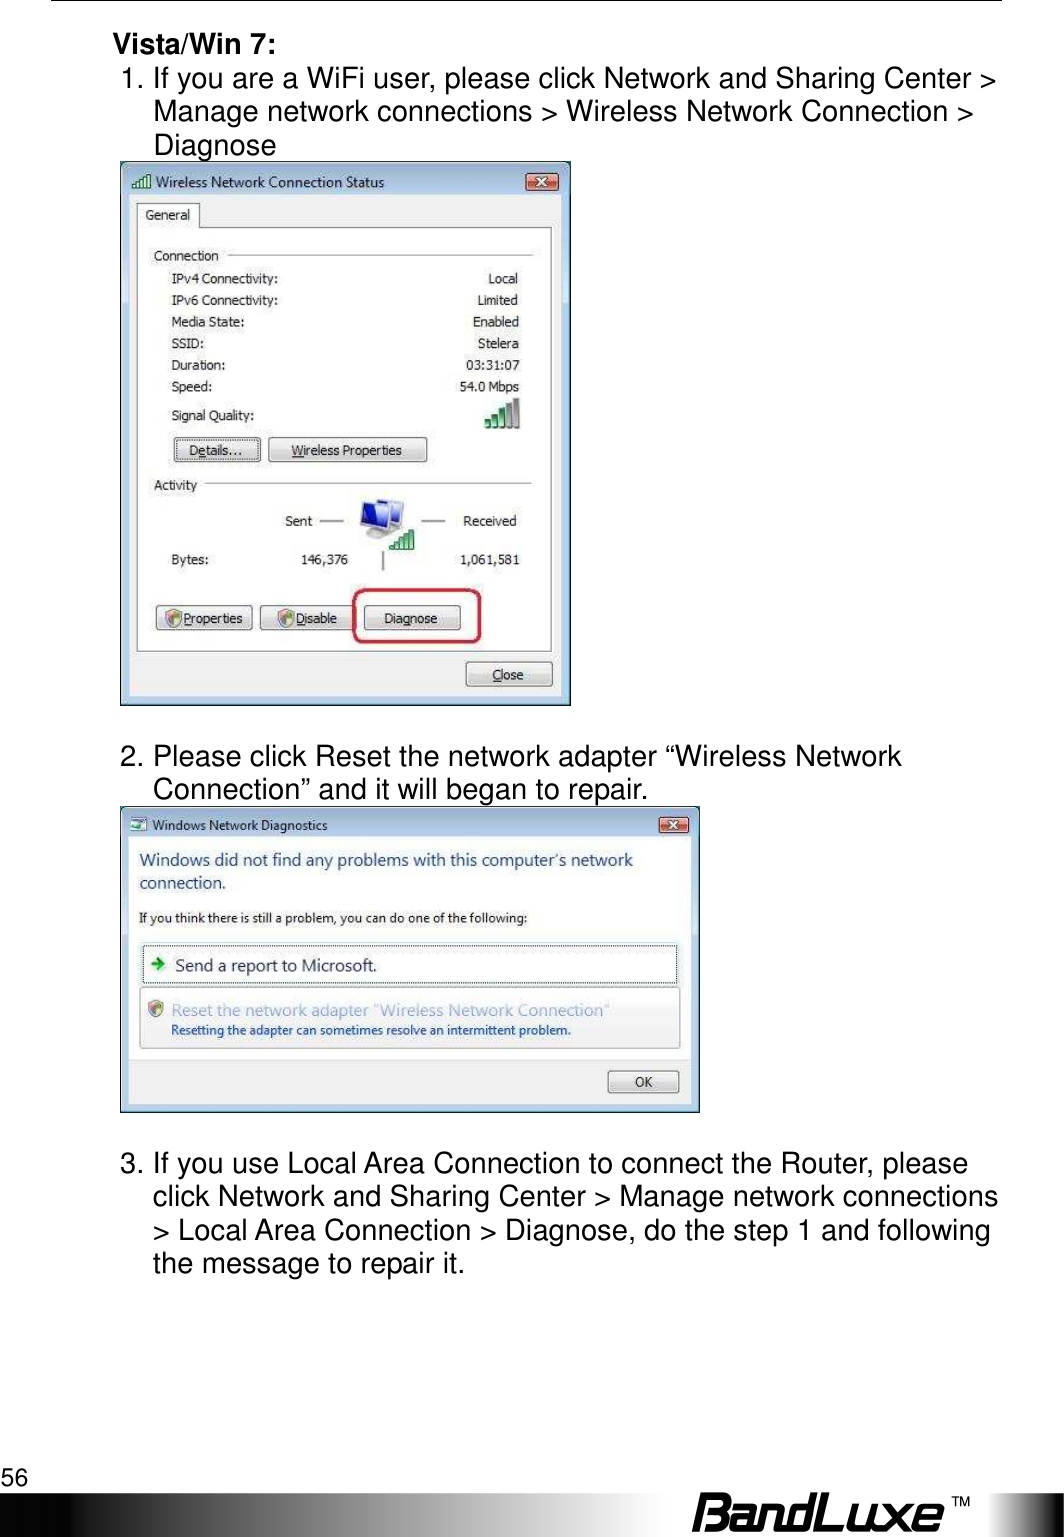 Appendix A: FAQ 56  Vista/Win 7:   1. If you are a WiFi user, please click Network and Sharing Center &gt; Manage network connections &gt; Wireless Network Connection &gt; Diagnose       2. Please click Reset the network adapter “Wireless Network Connection” and it will began to repair.     3. If you use Local Area Connection to connect the Router, please click Network and Sharing Center &gt; Manage network connections &gt; Local Area Connection &gt; Diagnose, do the step 1 and following the message to repair it.      